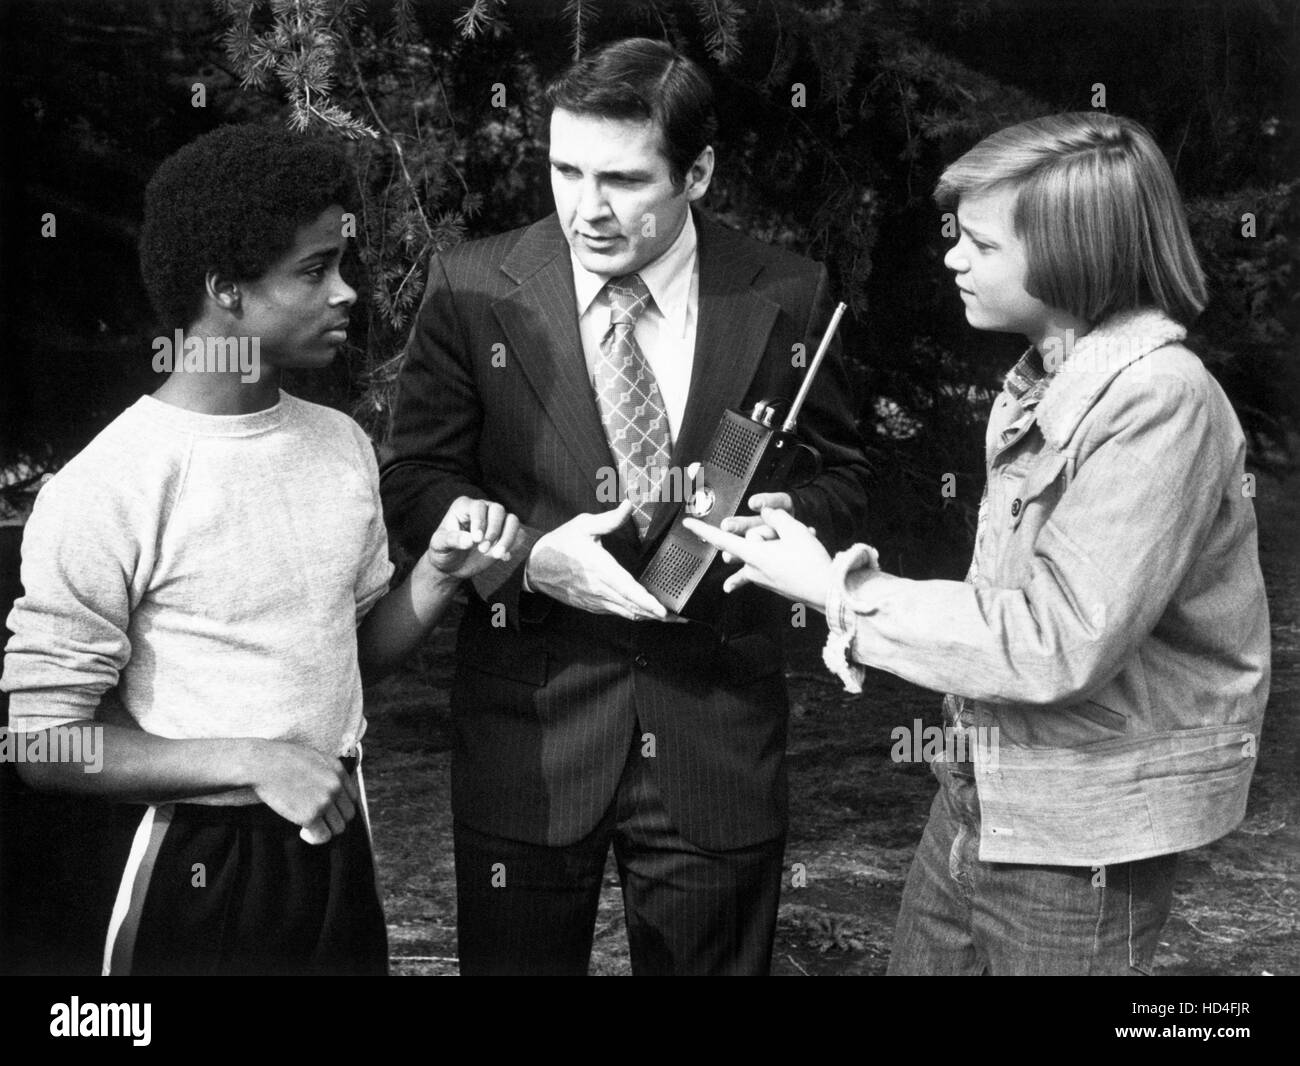 JAMES AT 16 (aka JAMES AT 15), from left: David Hubbard, Jack Knight, Lance Kerwin in 'The Gift' (Season 1, Episode 14, aired Stock Photo